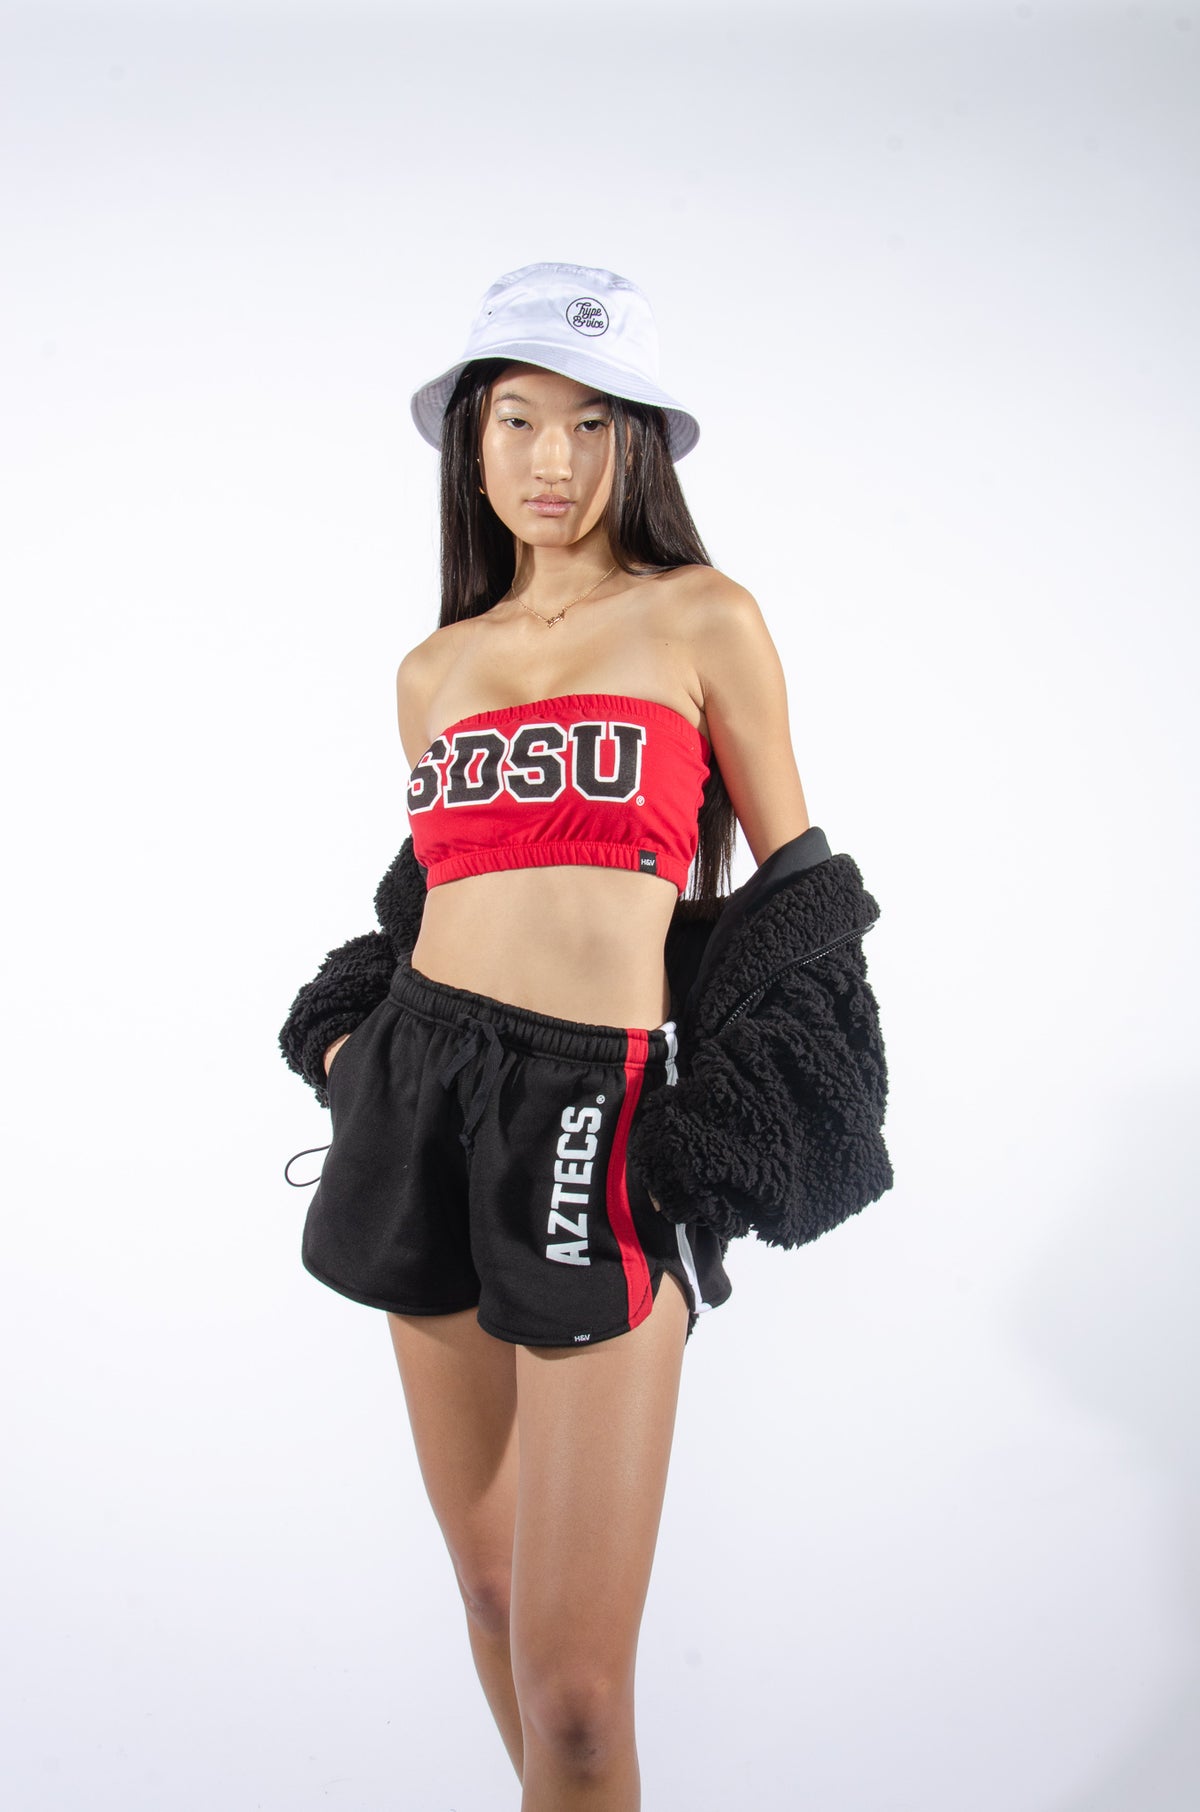 SDSU Red Bandeau Top - Hype and Vice